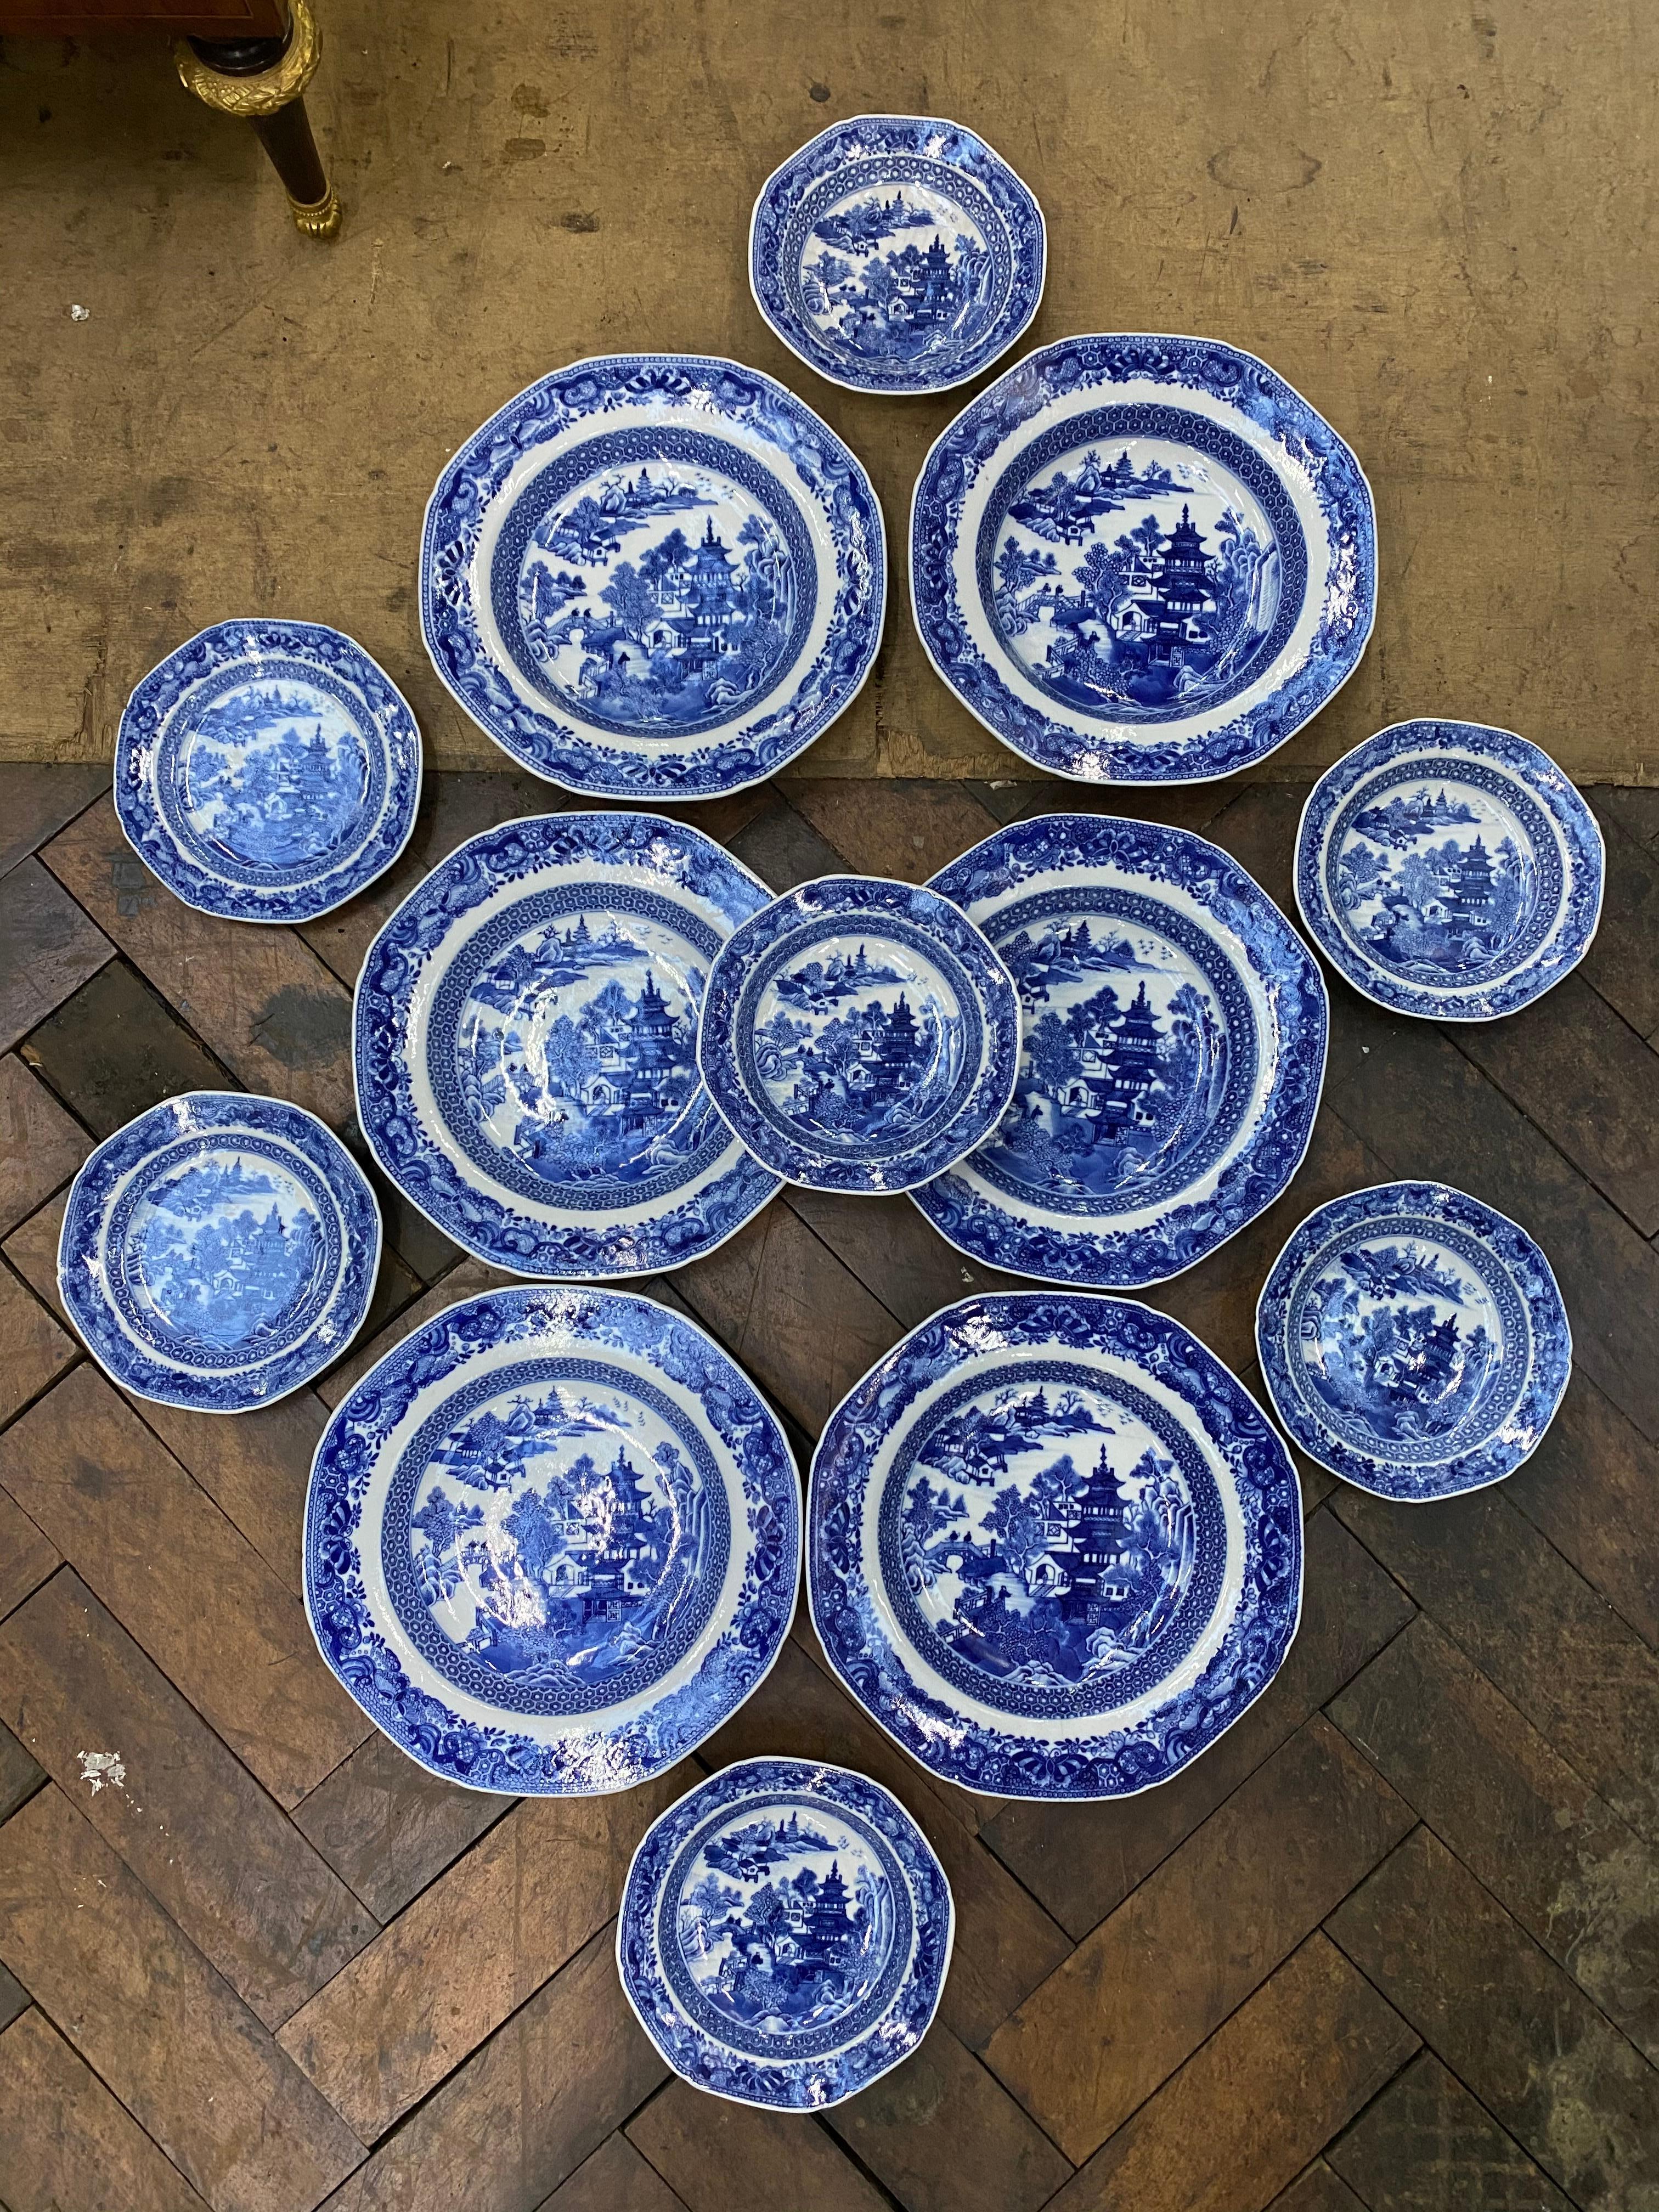 A very impressive and rare collection of 18th Century Chinese Blue and White Nanking porcelain diner plates and platers.
Thirty six pieces in all.